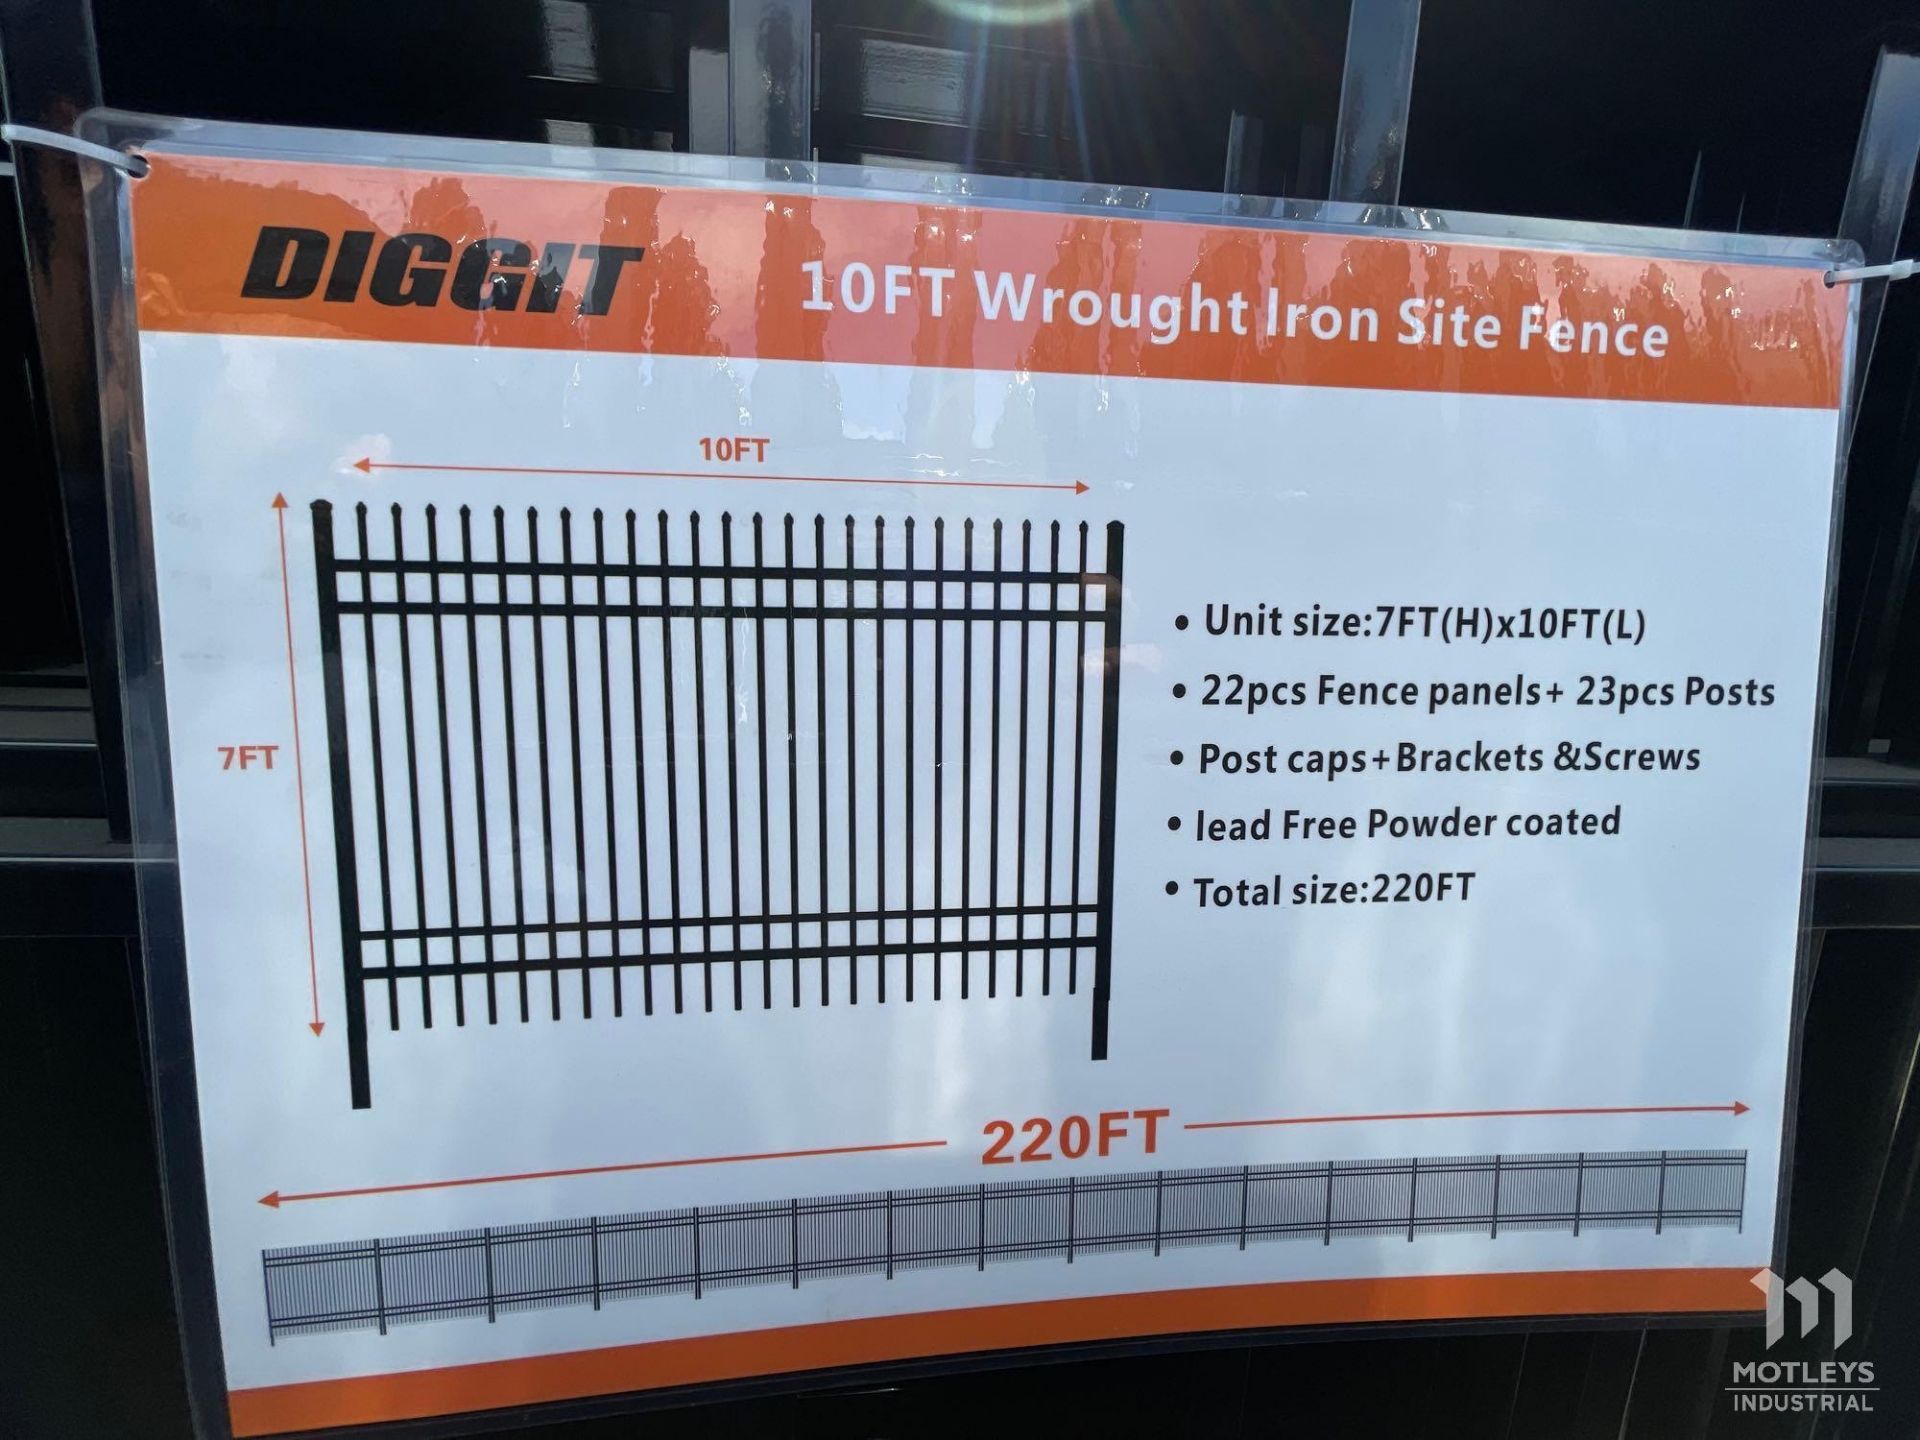 Diggit F10 Wrought Iron Fencing - Image 7 of 7